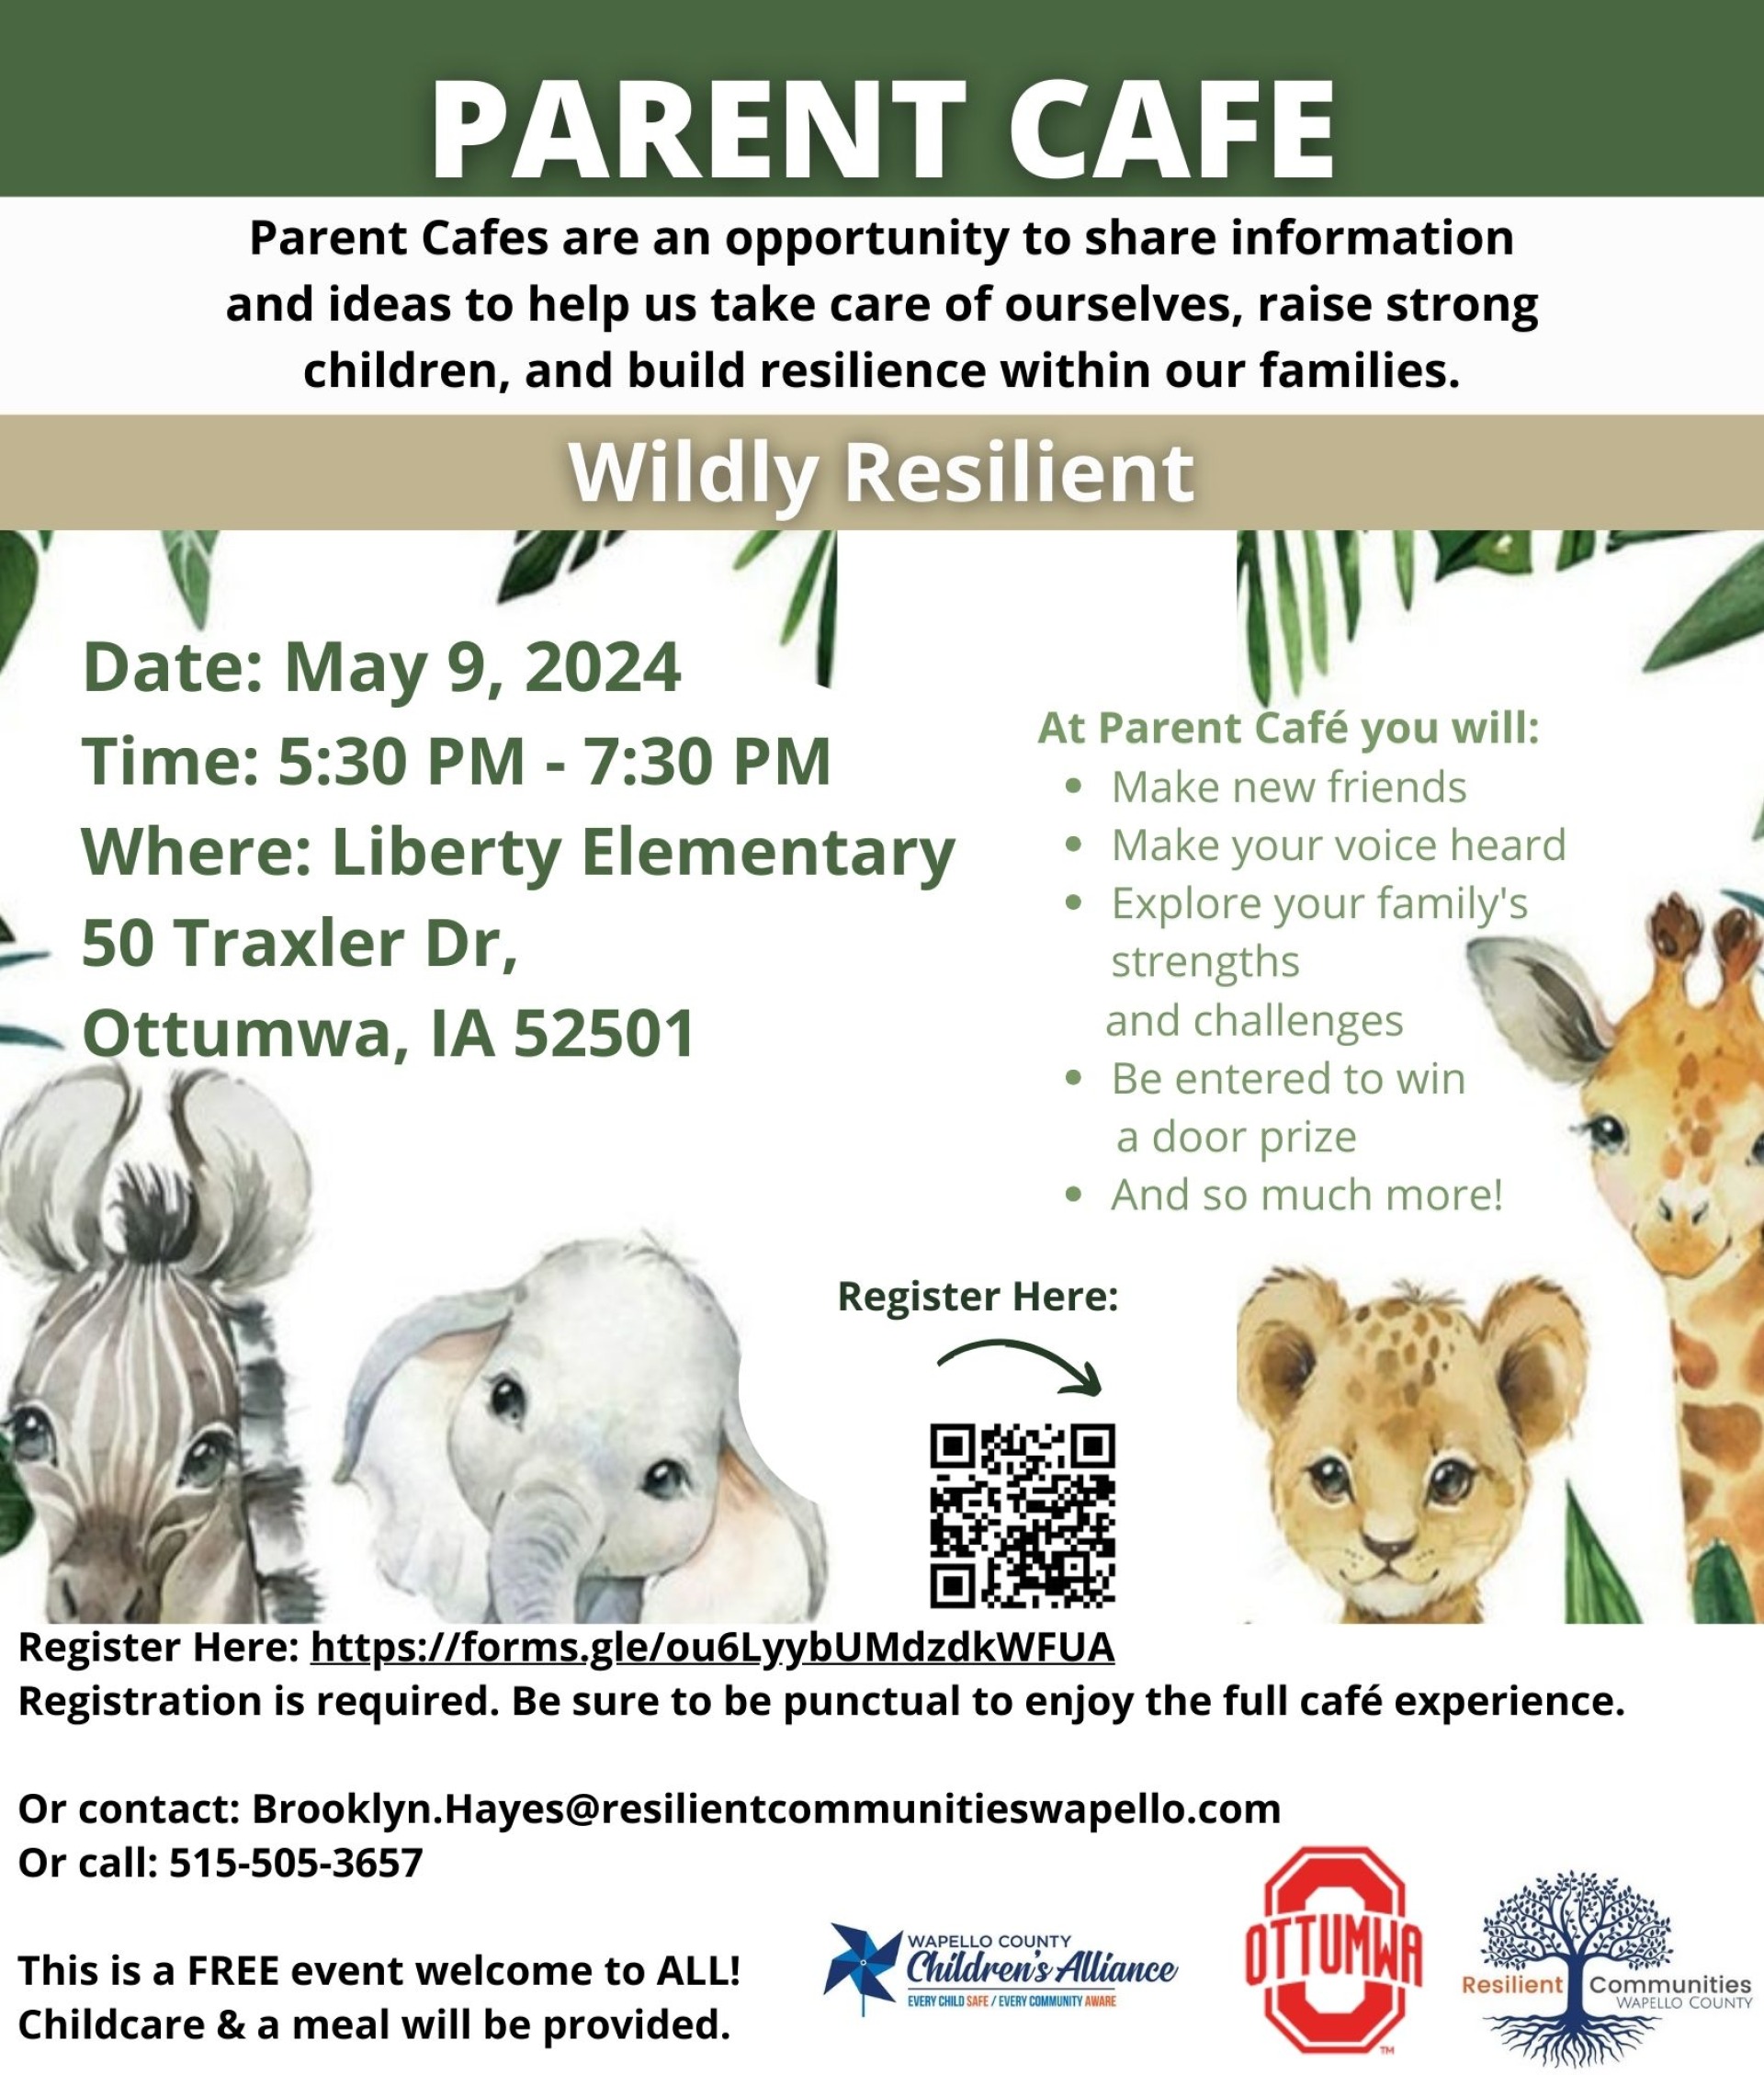 Parent Cafe - Wildly Resilient